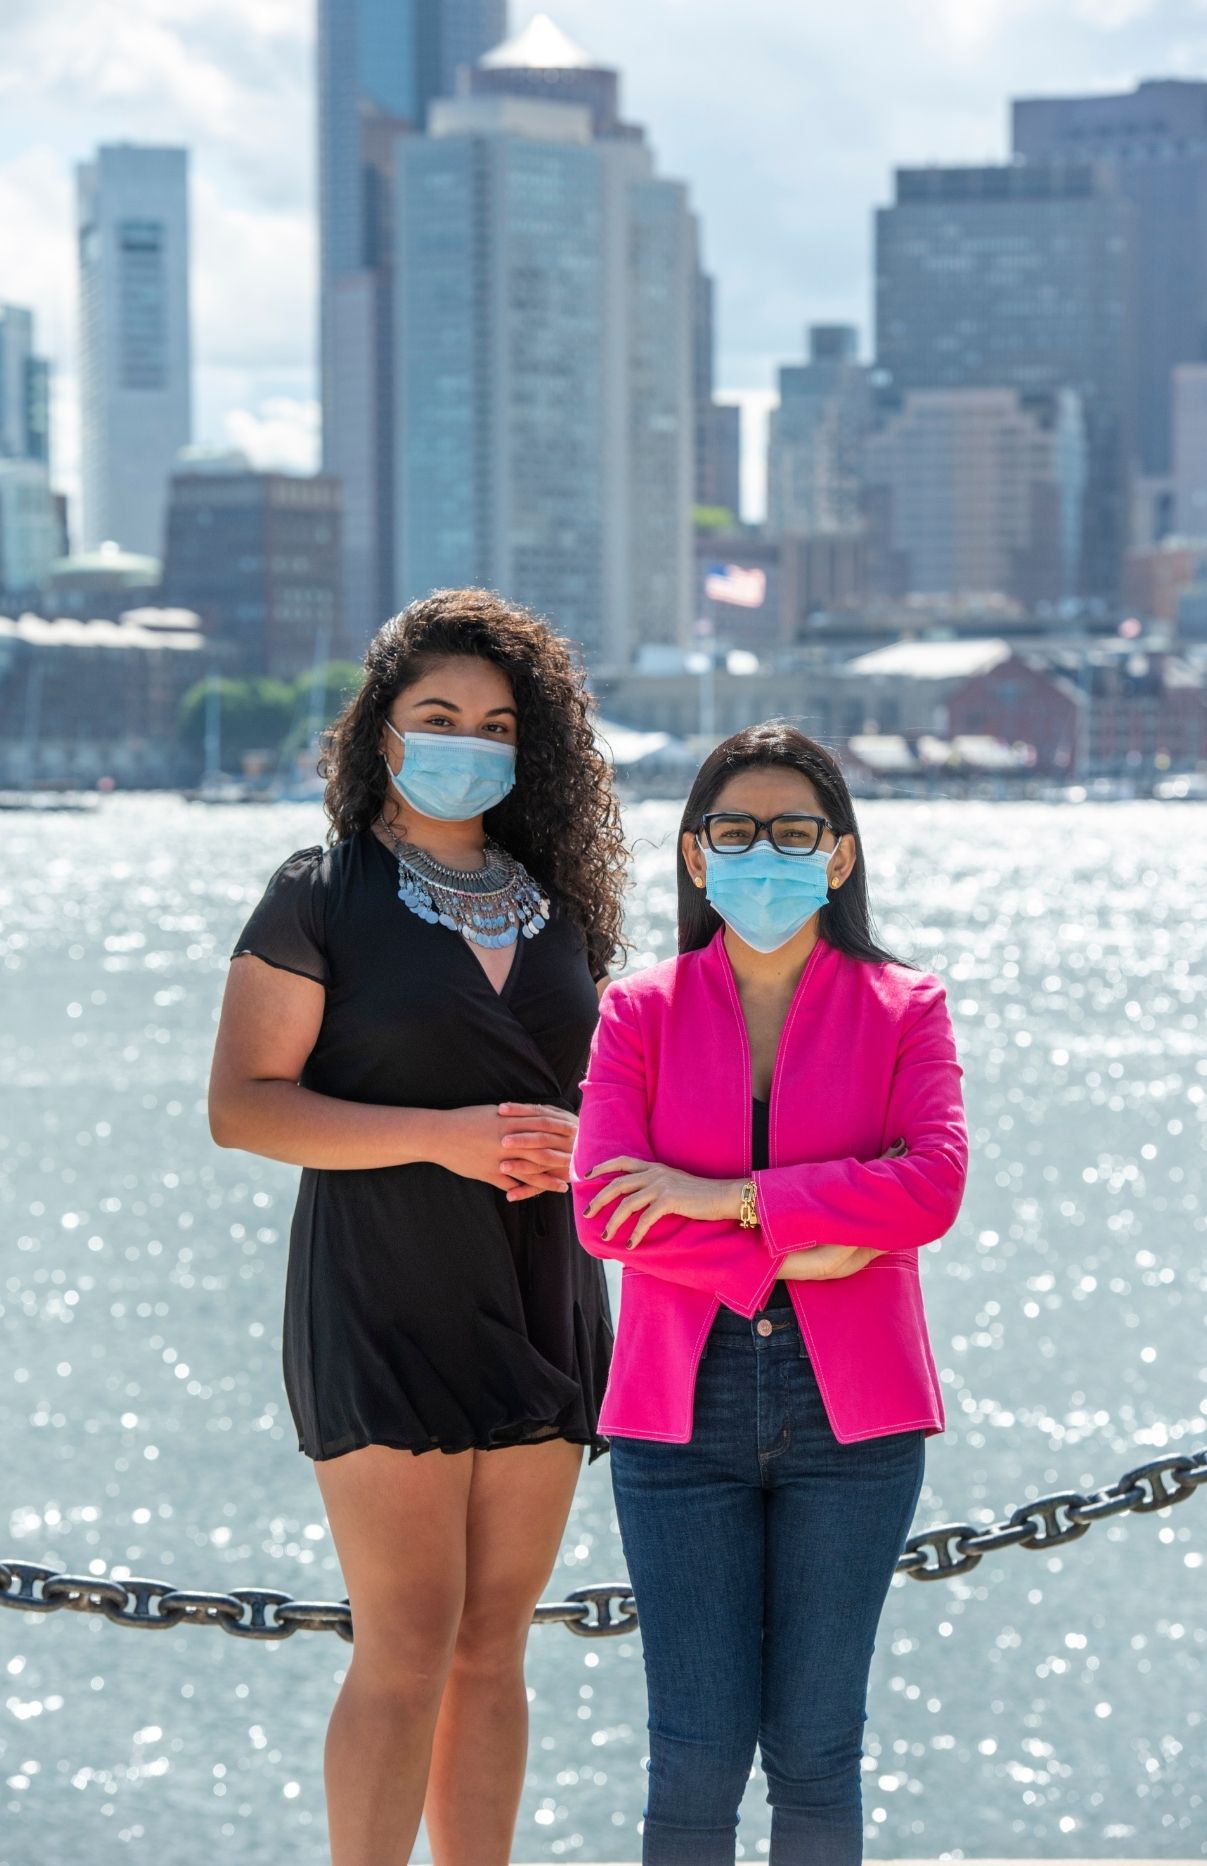 Alexa Cuellar and Patricia Montes standing next to each other. They're both wearing blue face masks. Alexa is wearing a short-sleeved black romper and a turquoise necklace. Patricia is wearing a pink blazer and blue jeans. Behind them is the Boston Seaport and city buildings.